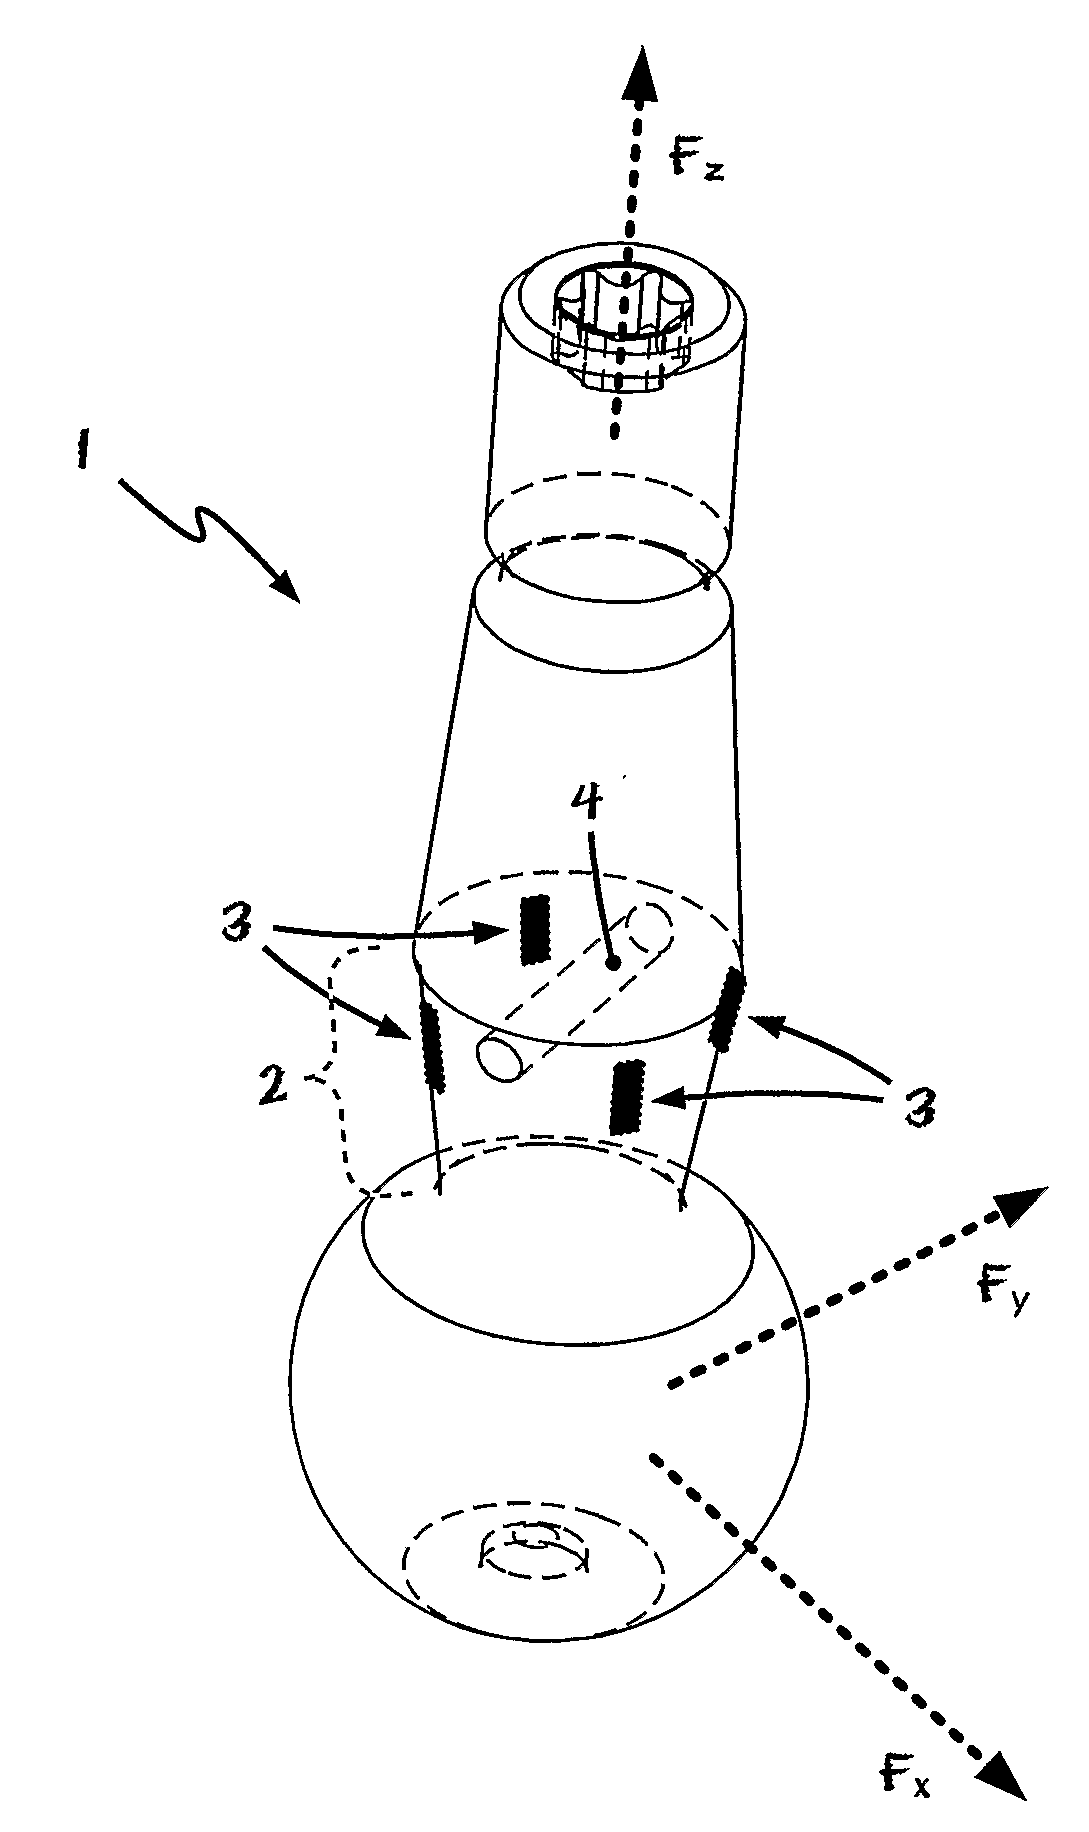 Load-Sensing System with at Least One Ball and Socket Joint